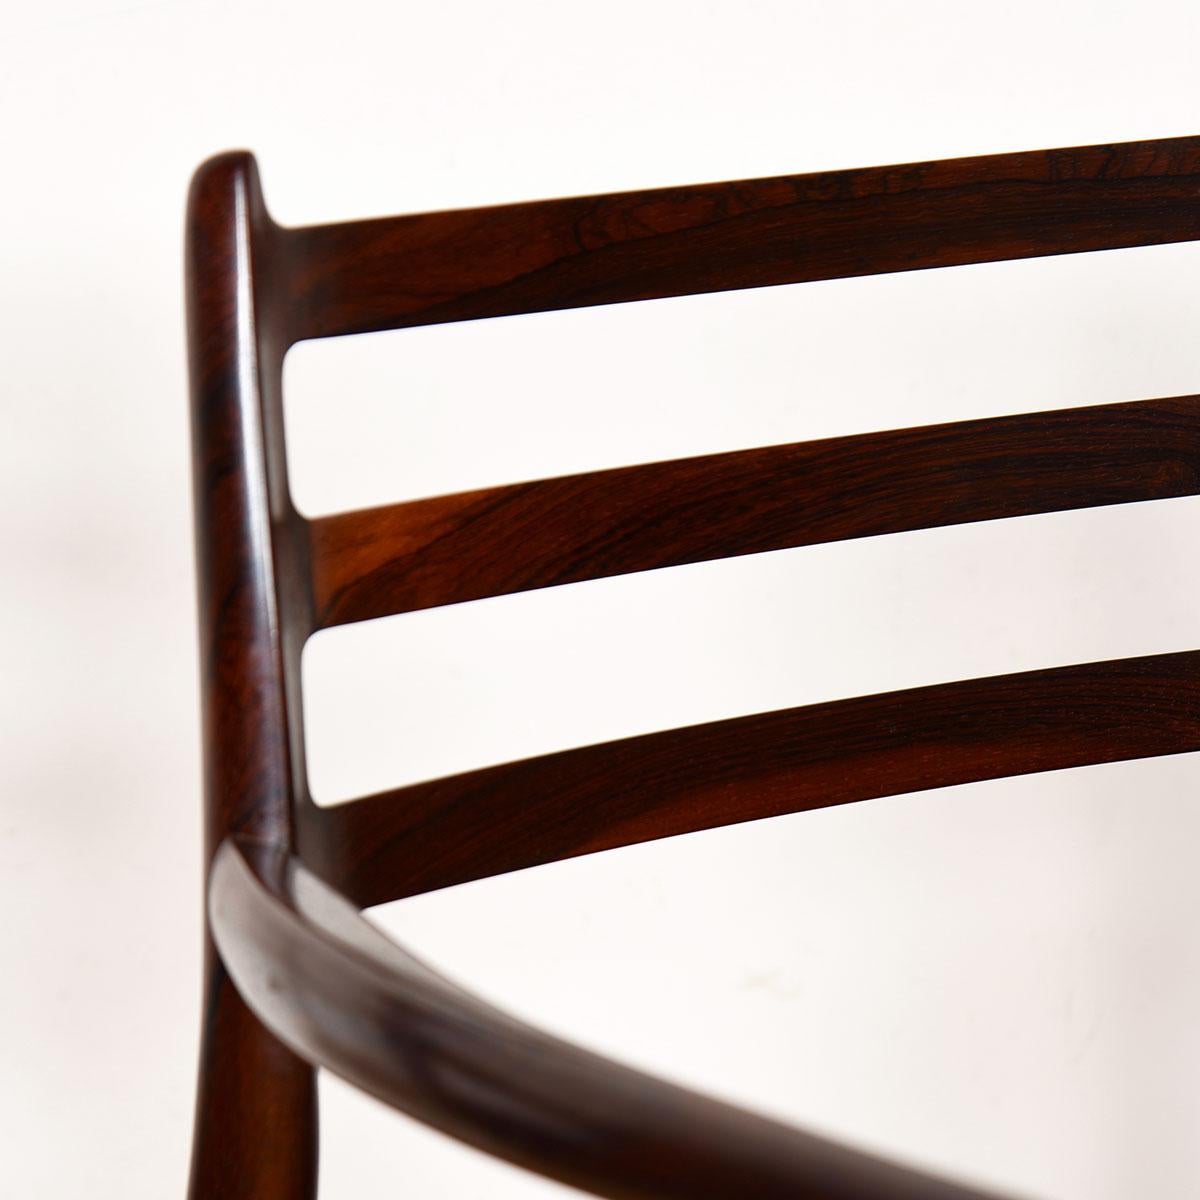 20th Century Pair of Moller Danish Horn Arm-Chairs #62 in Brazilian Rosewood For Sale